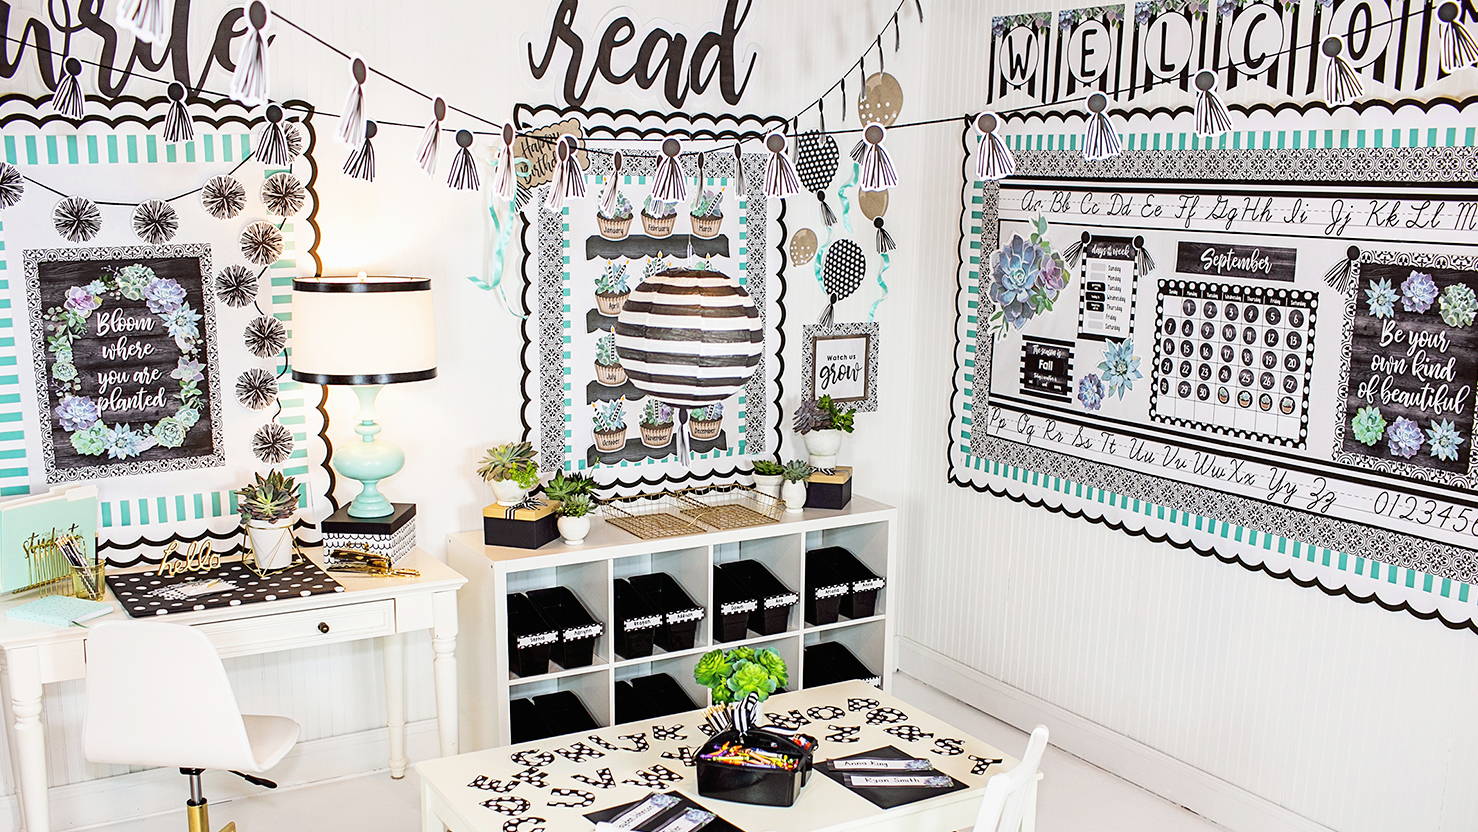 Classroom decorated with Black and White  Simply Stylish Classroom  Décor Theme